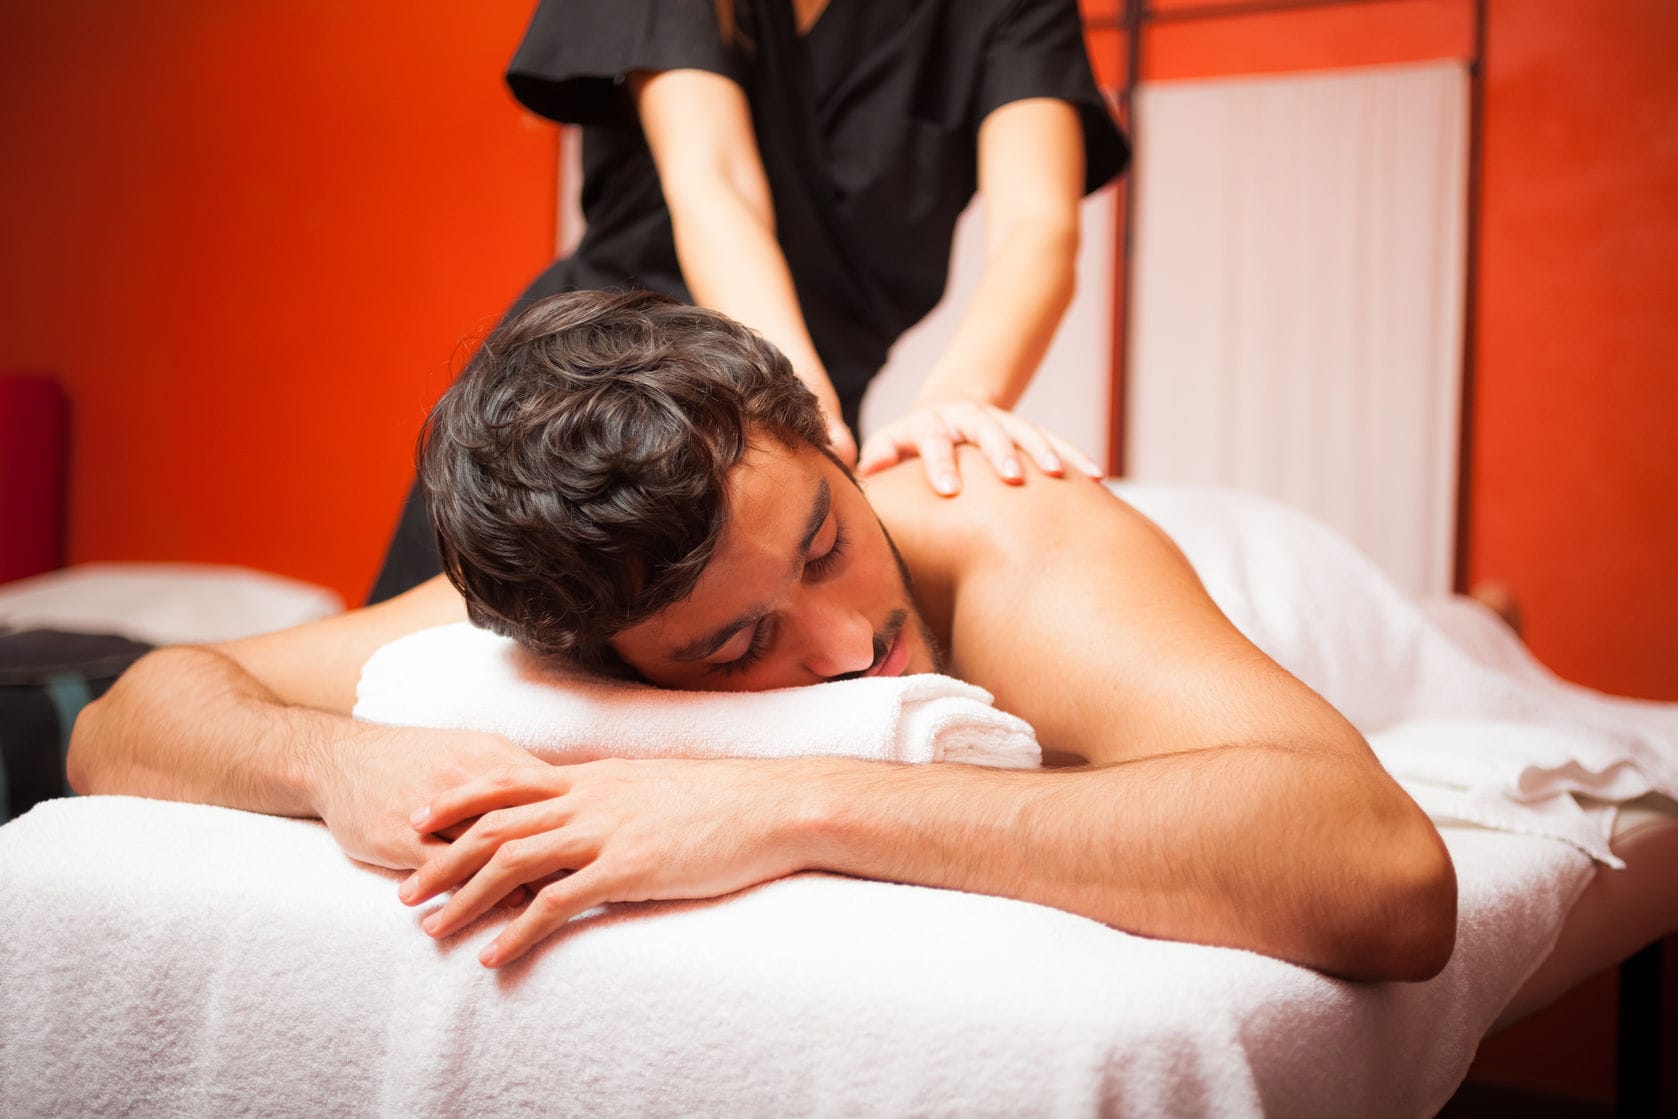 Orthopedic Medical Massage Therapy - Manual, Medical, Sports Massage Therapy | https://physiologicnyc.com/sports-medical-massage/